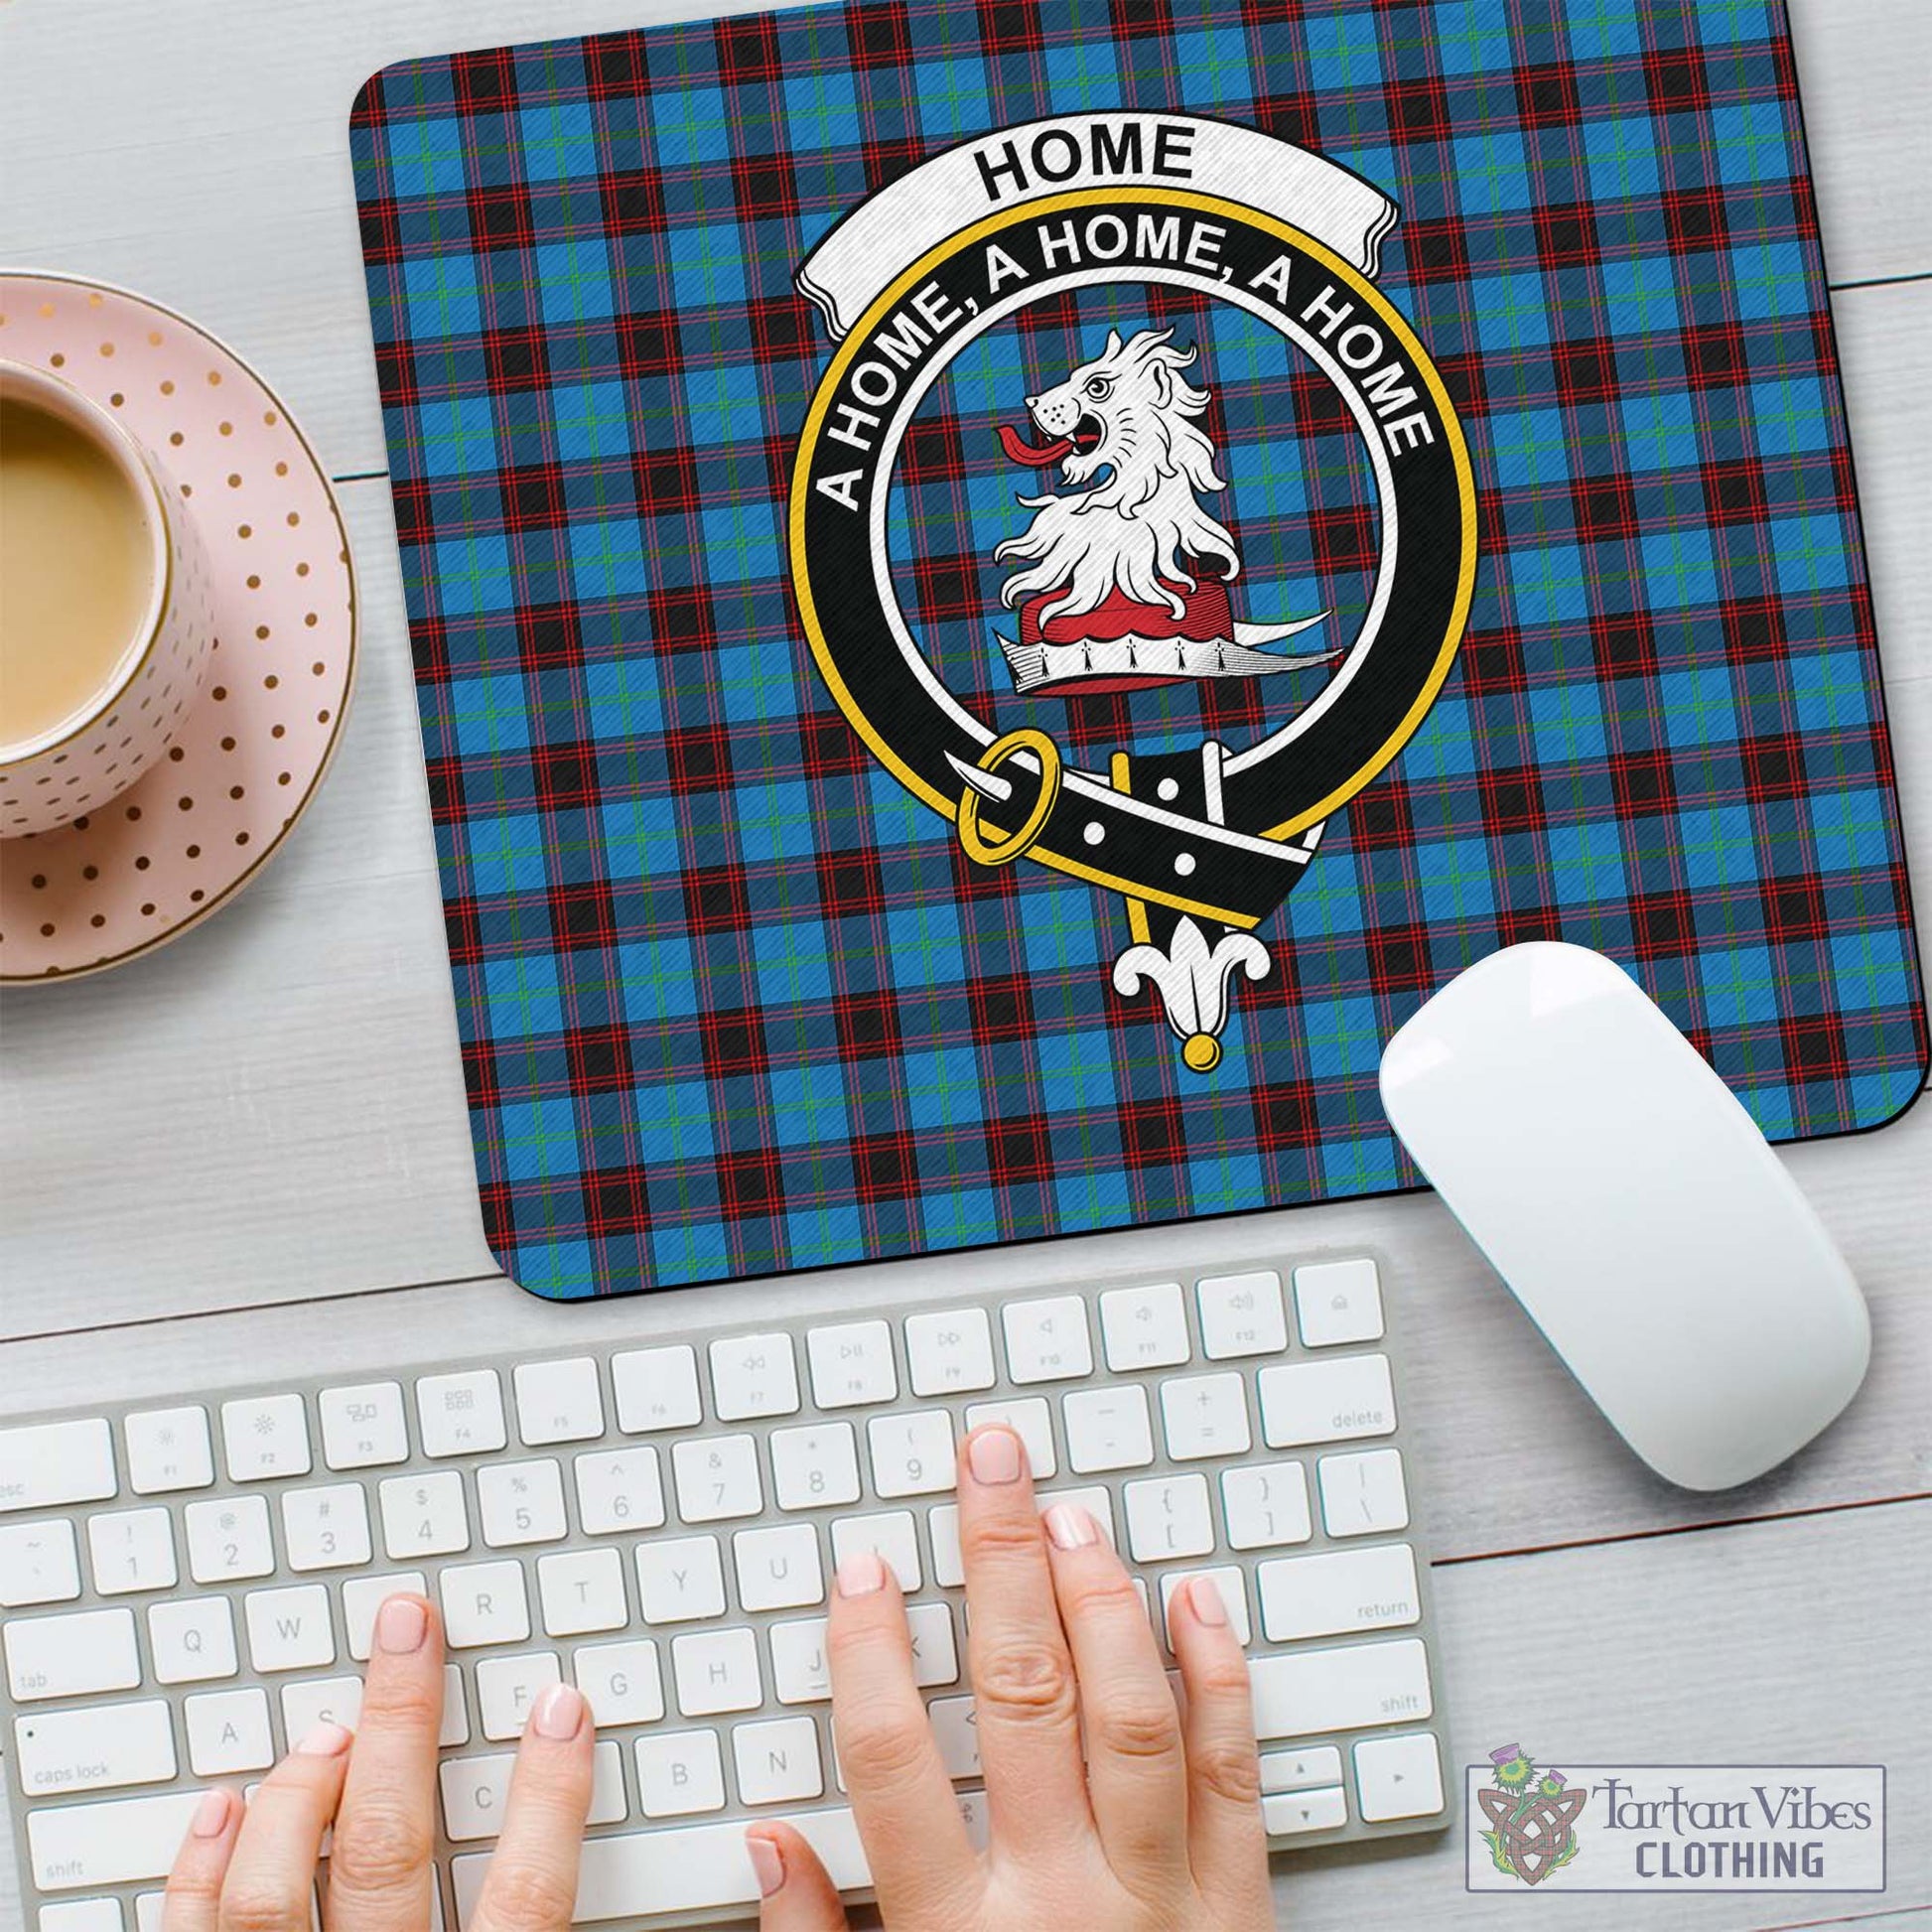 Tartan Vibes Clothing Home Ancient Tartan Mouse Pad with Family Crest